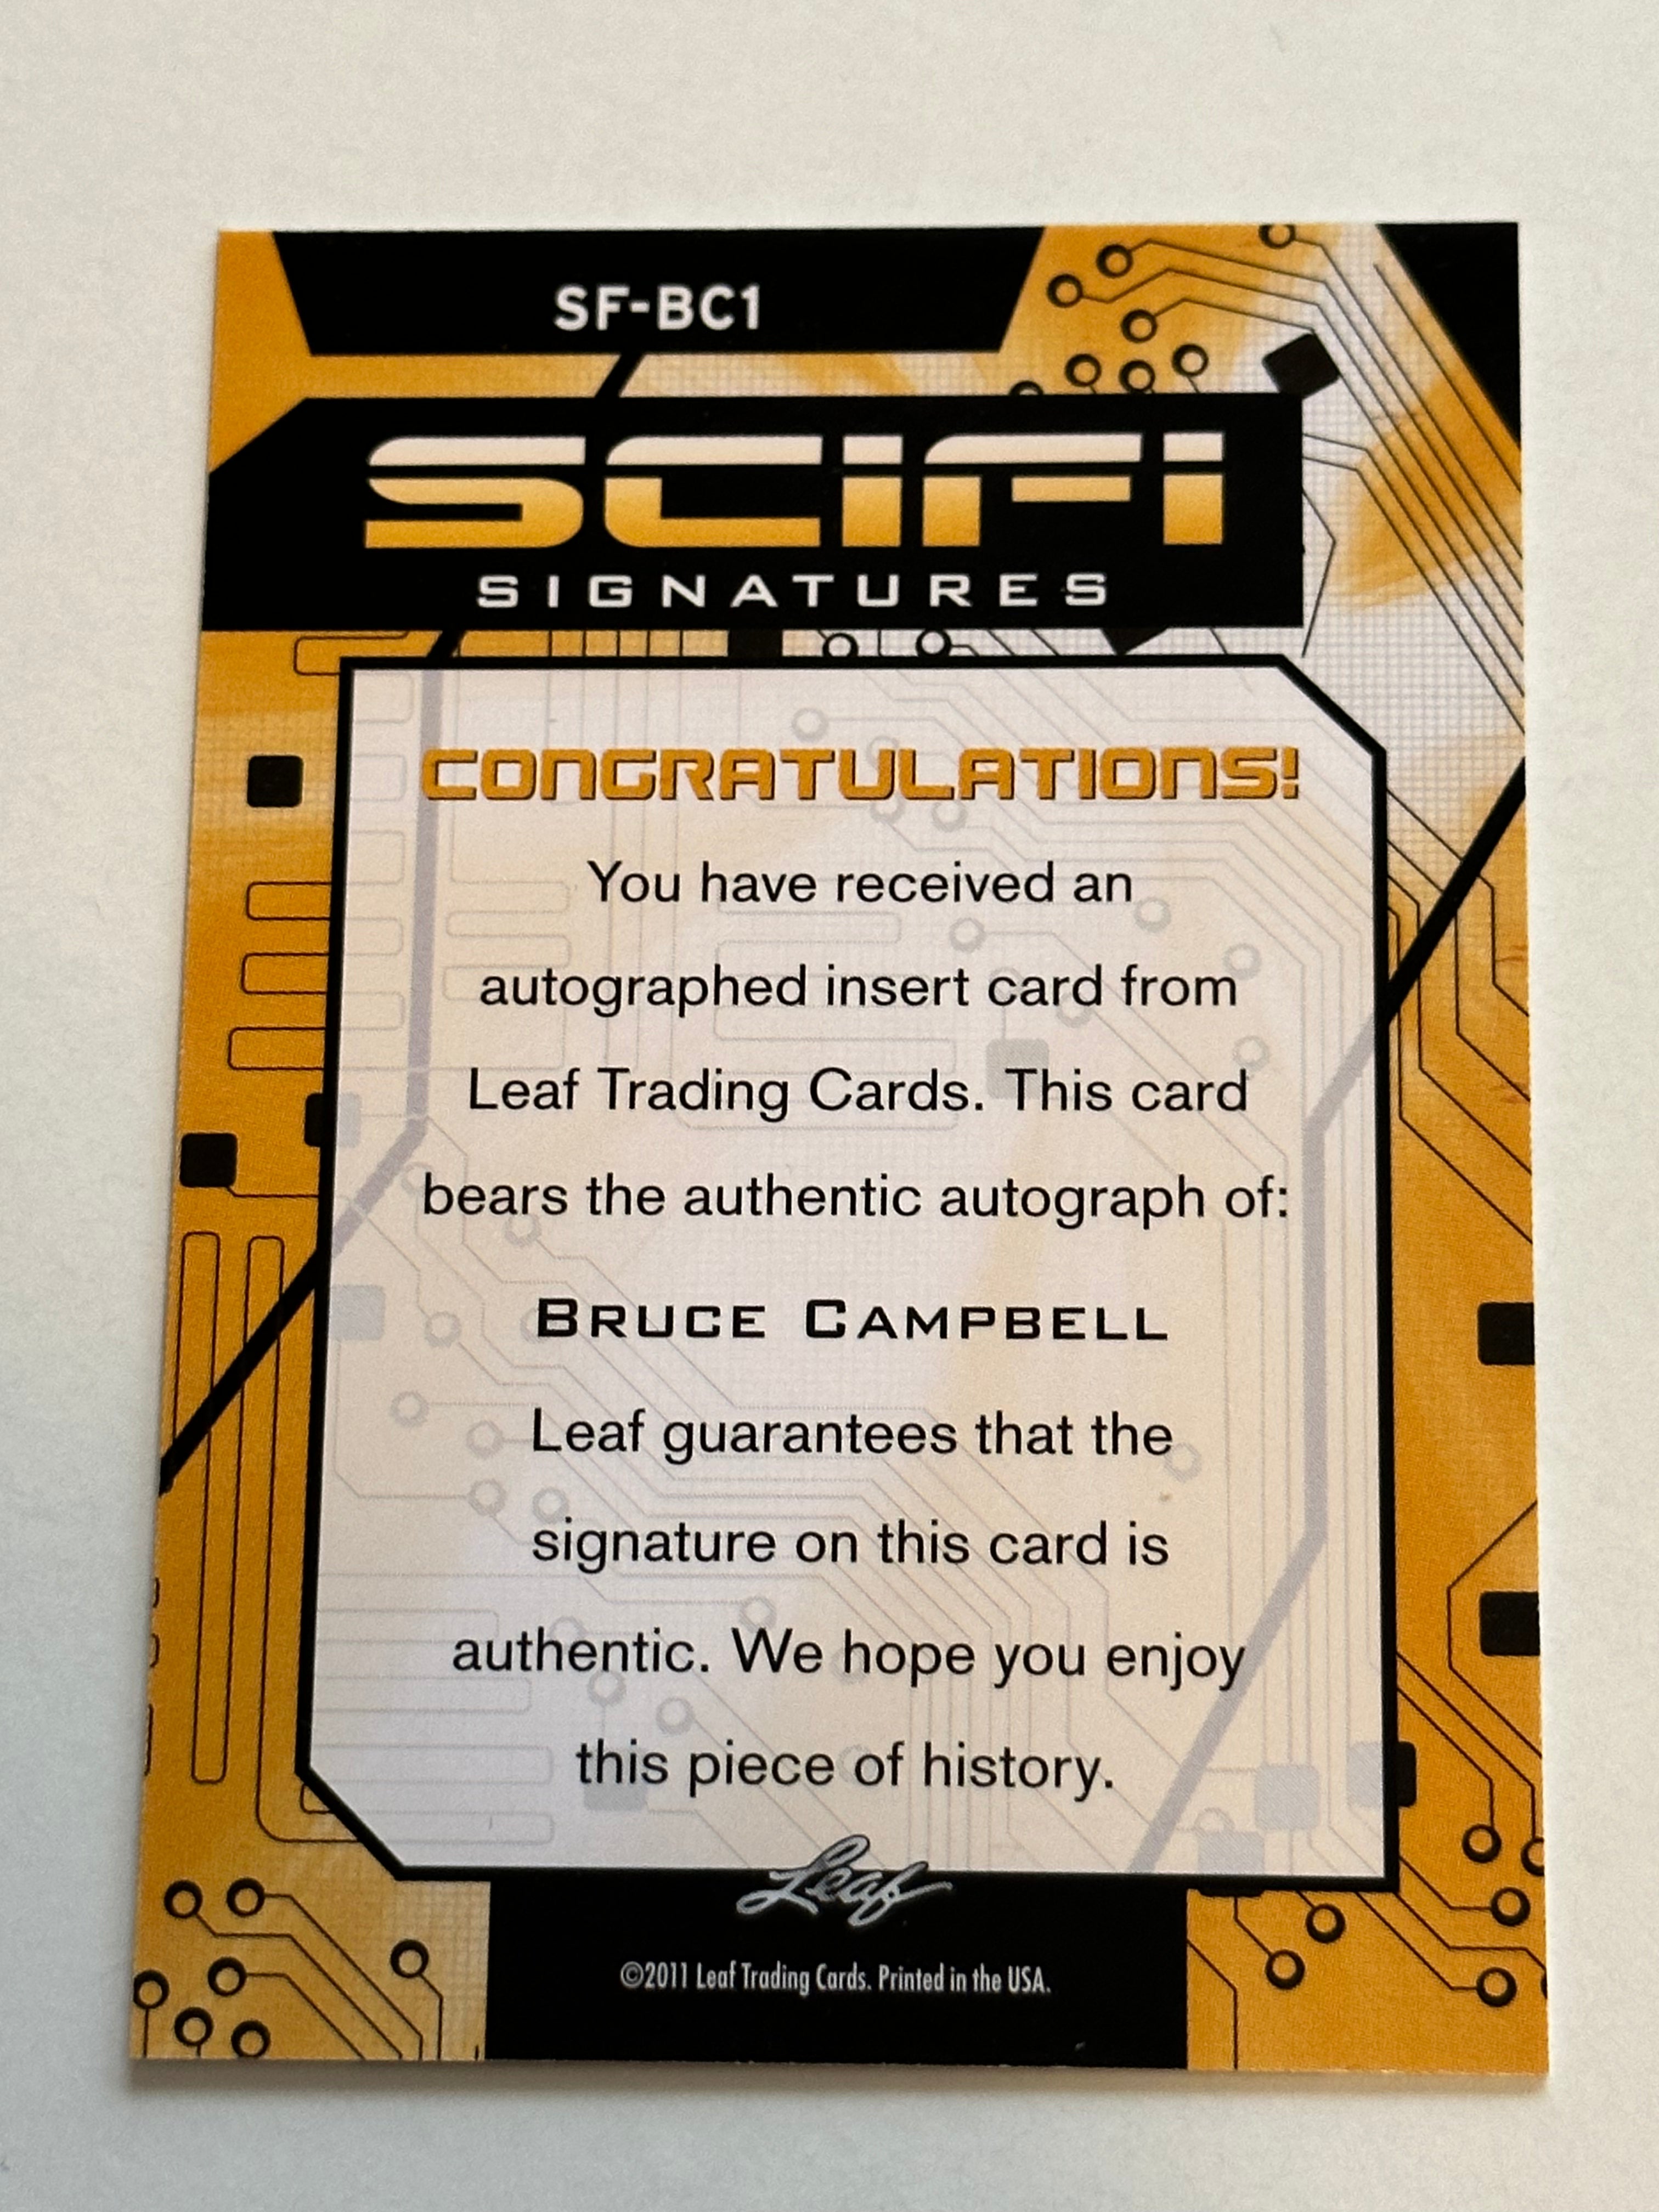 Bruce Campbell autograph insert card certified on back.